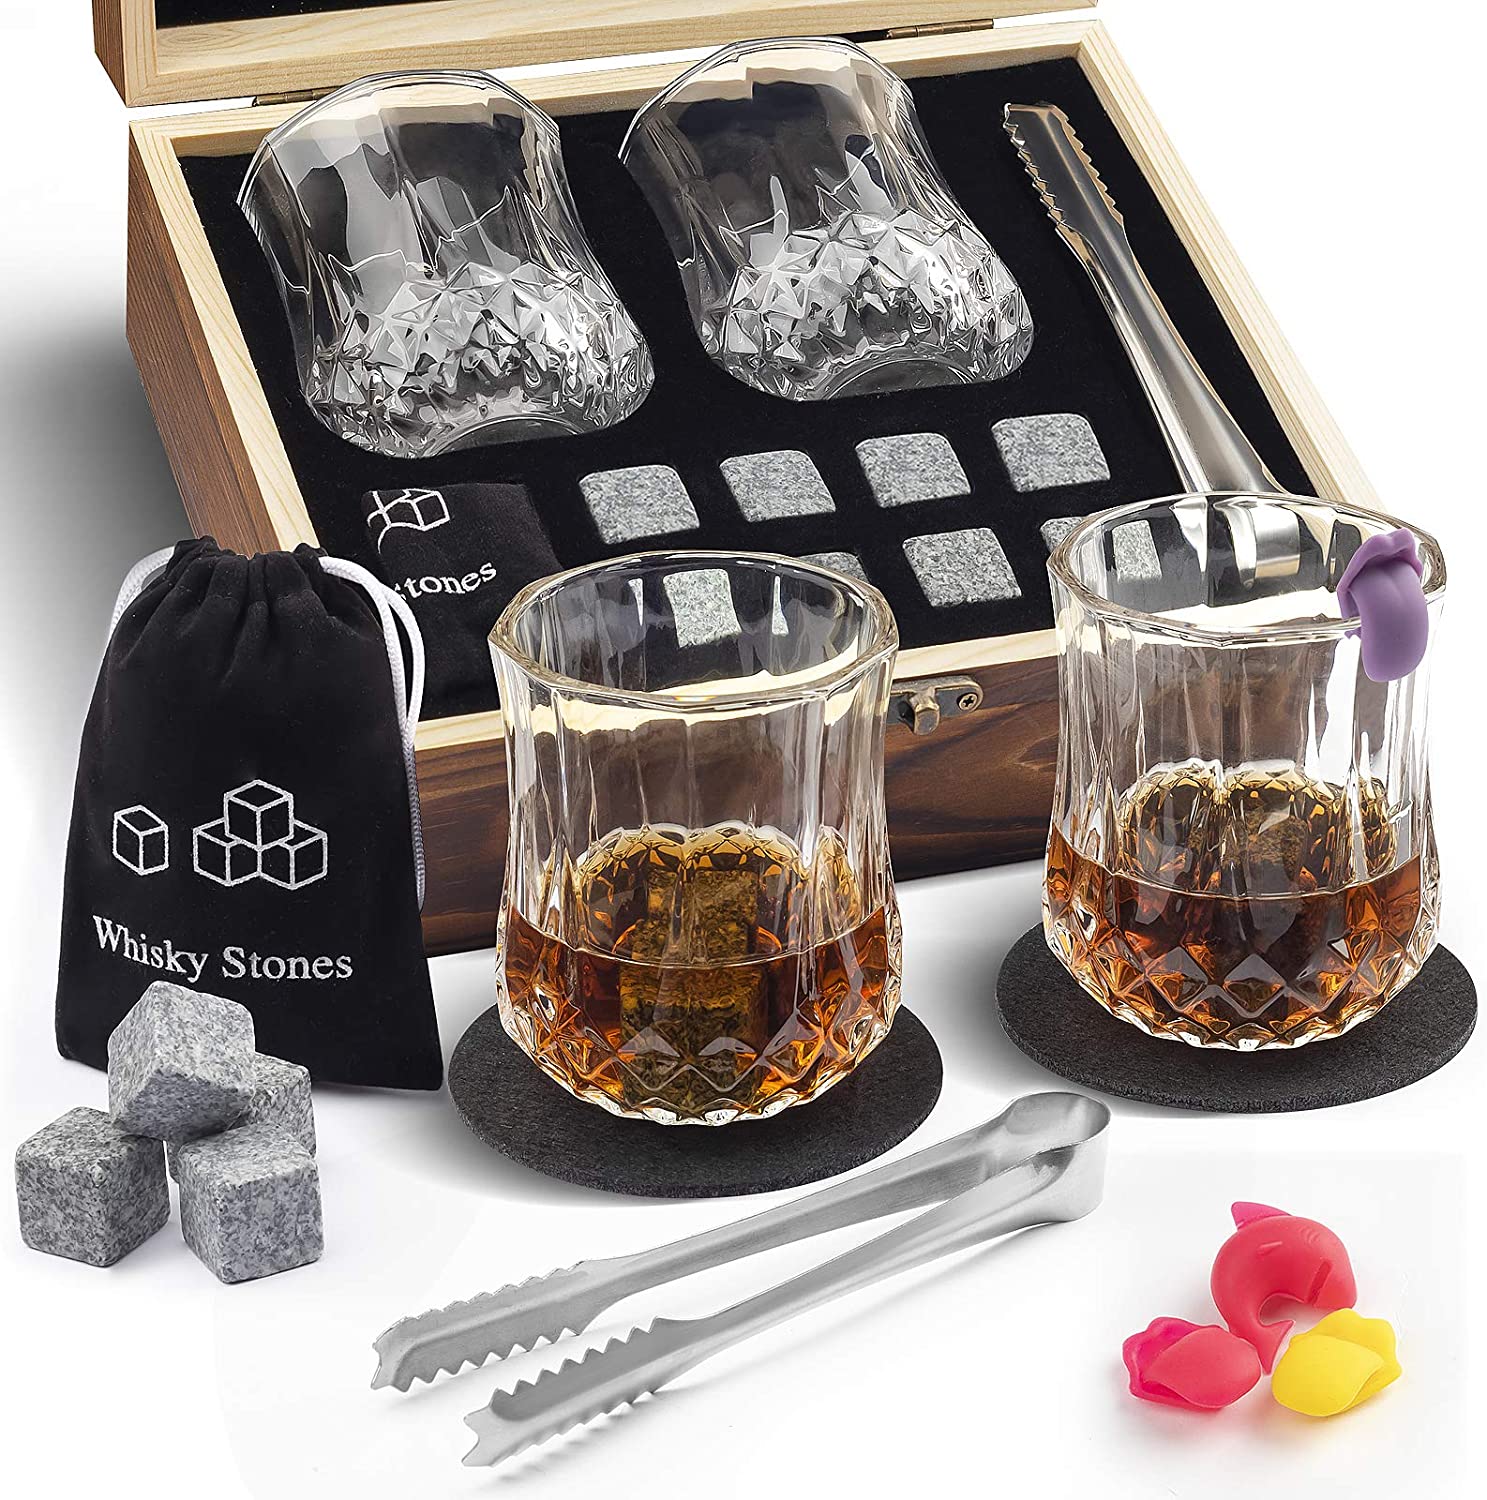 China Manufacturer for Wood Box -  nature stone coaster Reusable Ice Cubes Chilling Stones crystal whiskey wine glass wooden gift box set  – Shunstone